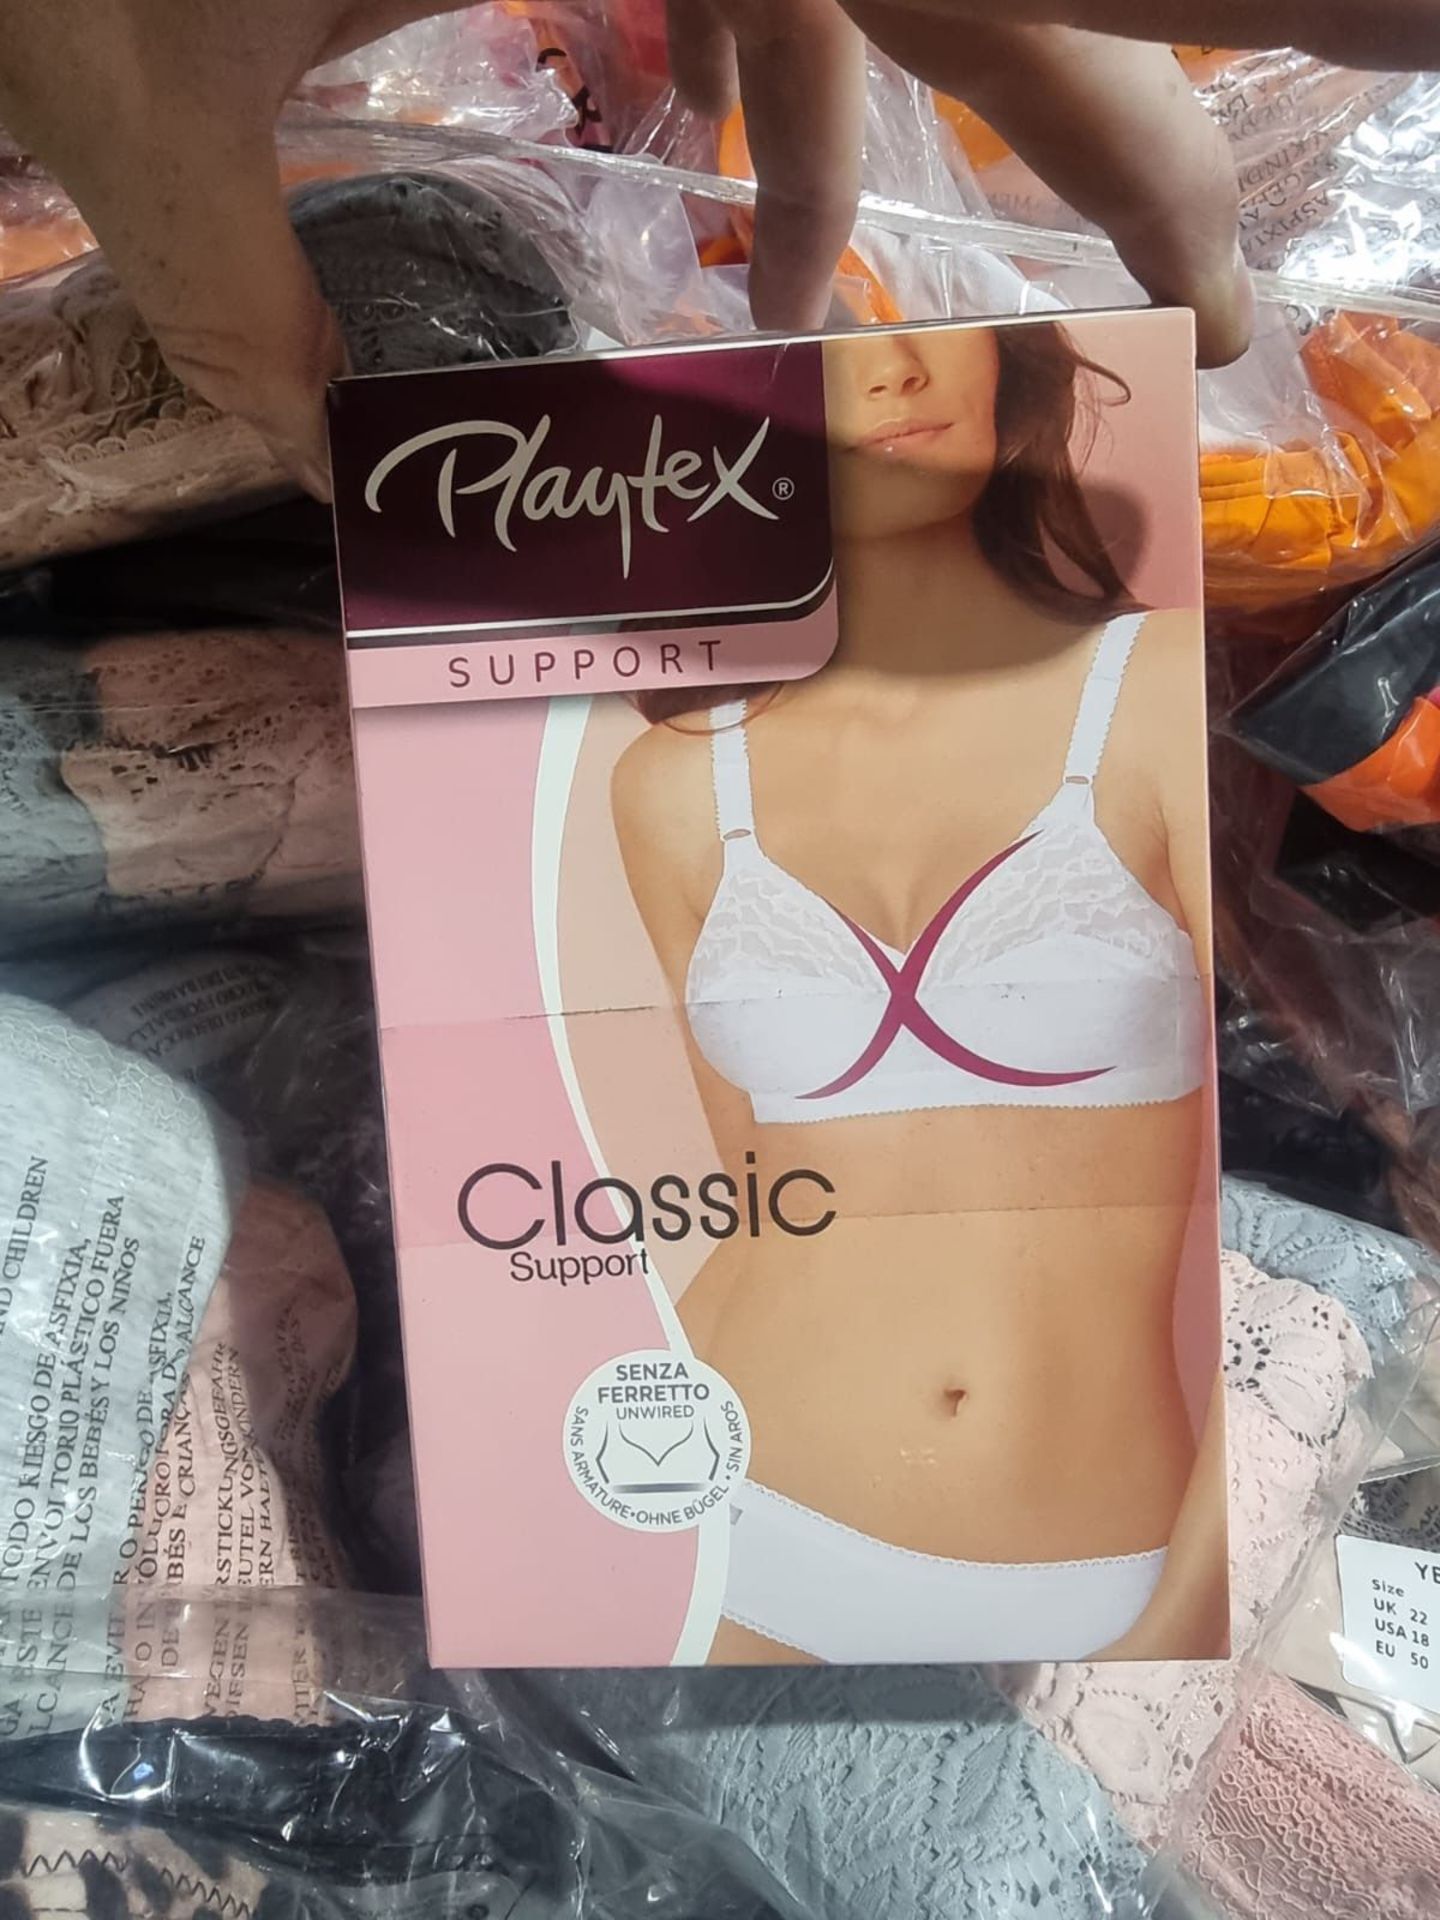 100 x NEW PACKAGED ASSORTED SWIM & UNDERWEAR FROM BRAND SUCH AS WONDERBRA, BOUX AVENUE, ANN SUMMERS, - Image 11 of 53